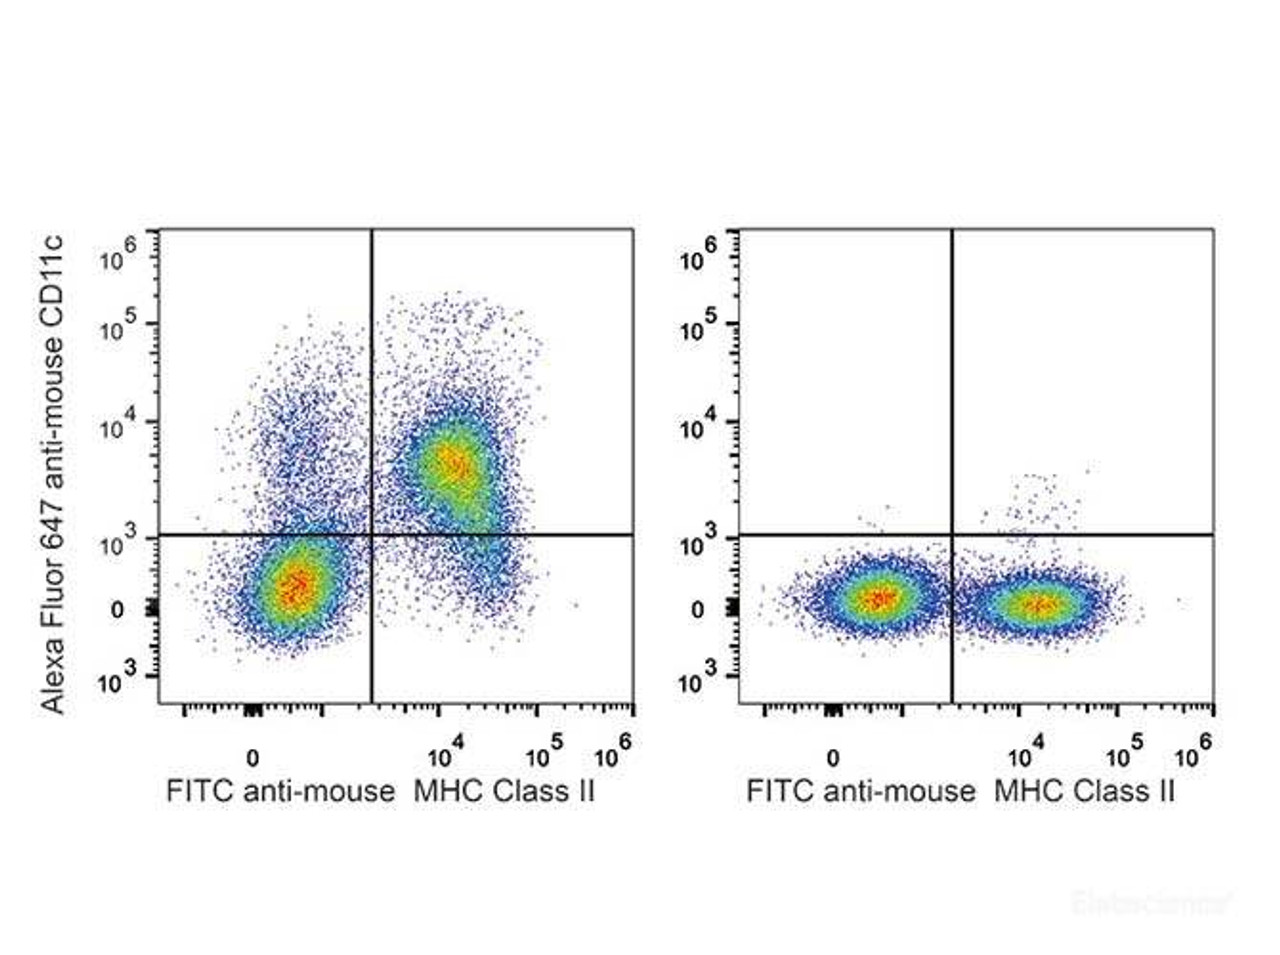 C57BL/6 murine splenocytes are stained with AF647 Anti-Mouse CD11c Antibody and FITC Anti-Mouse MHC II (I-A/I-E) Antibody(Left). Splenocytes stained with FITC Anti-Mouse MHC II (I-A/I-E) Antibody(Right) are used as control.